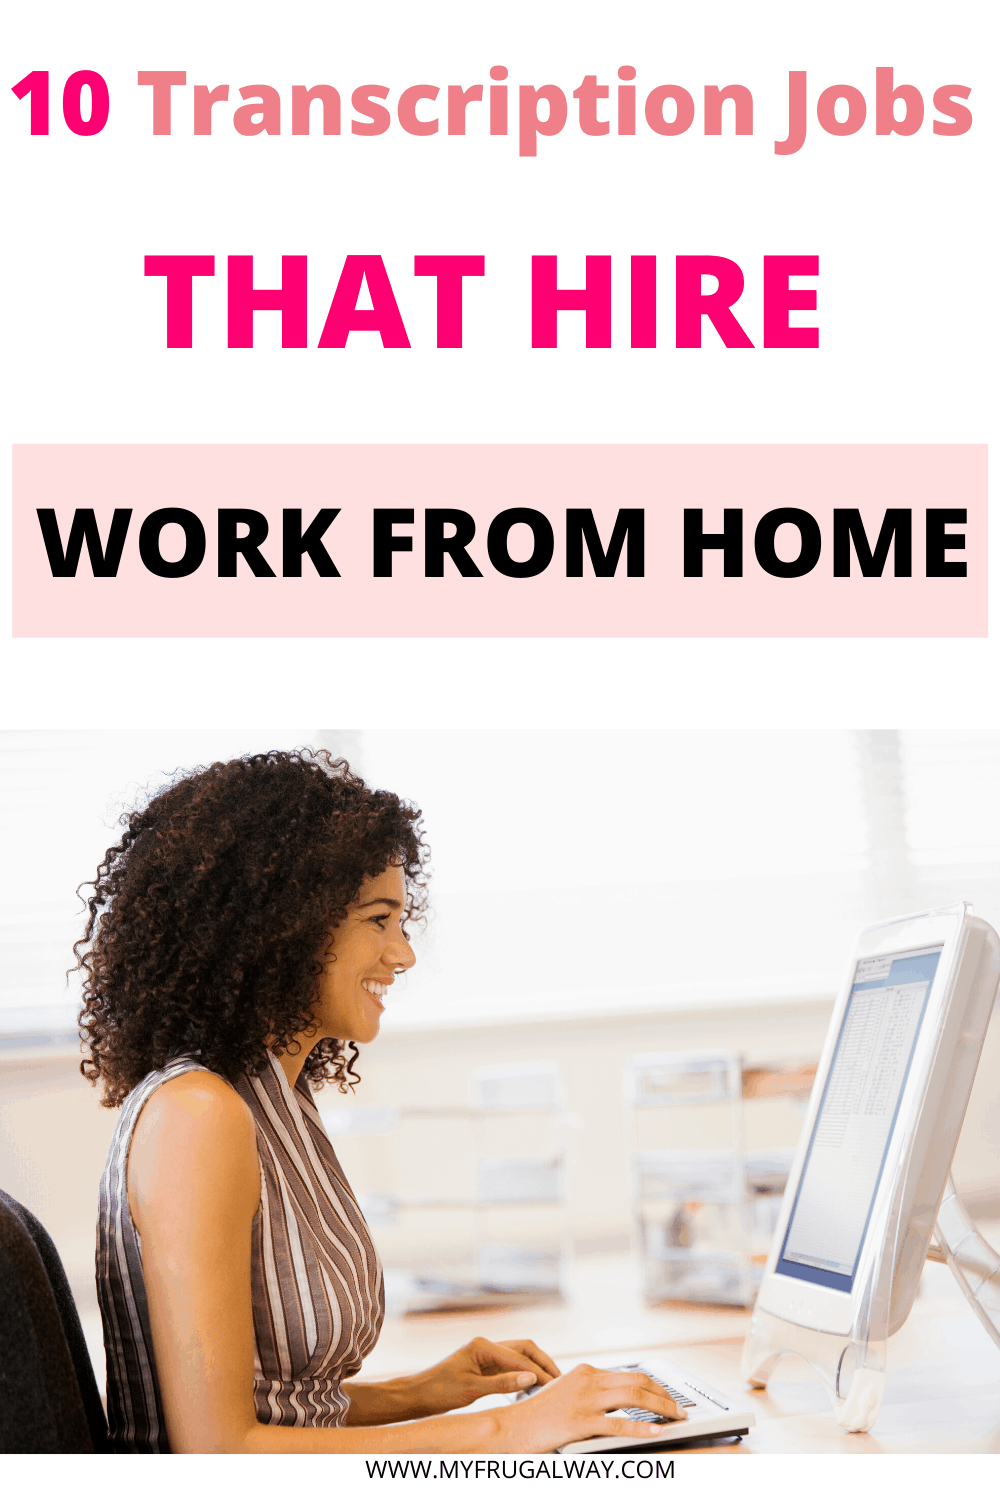 10 companies that hire work from home transcription jobs. If you are a stay at home mom looking to earn extra money these transcription jobs are perfect for beginners. #workfromhome #stayathomemoms #mompaneur #girlboss #extraincome #sidehustle #transcibe